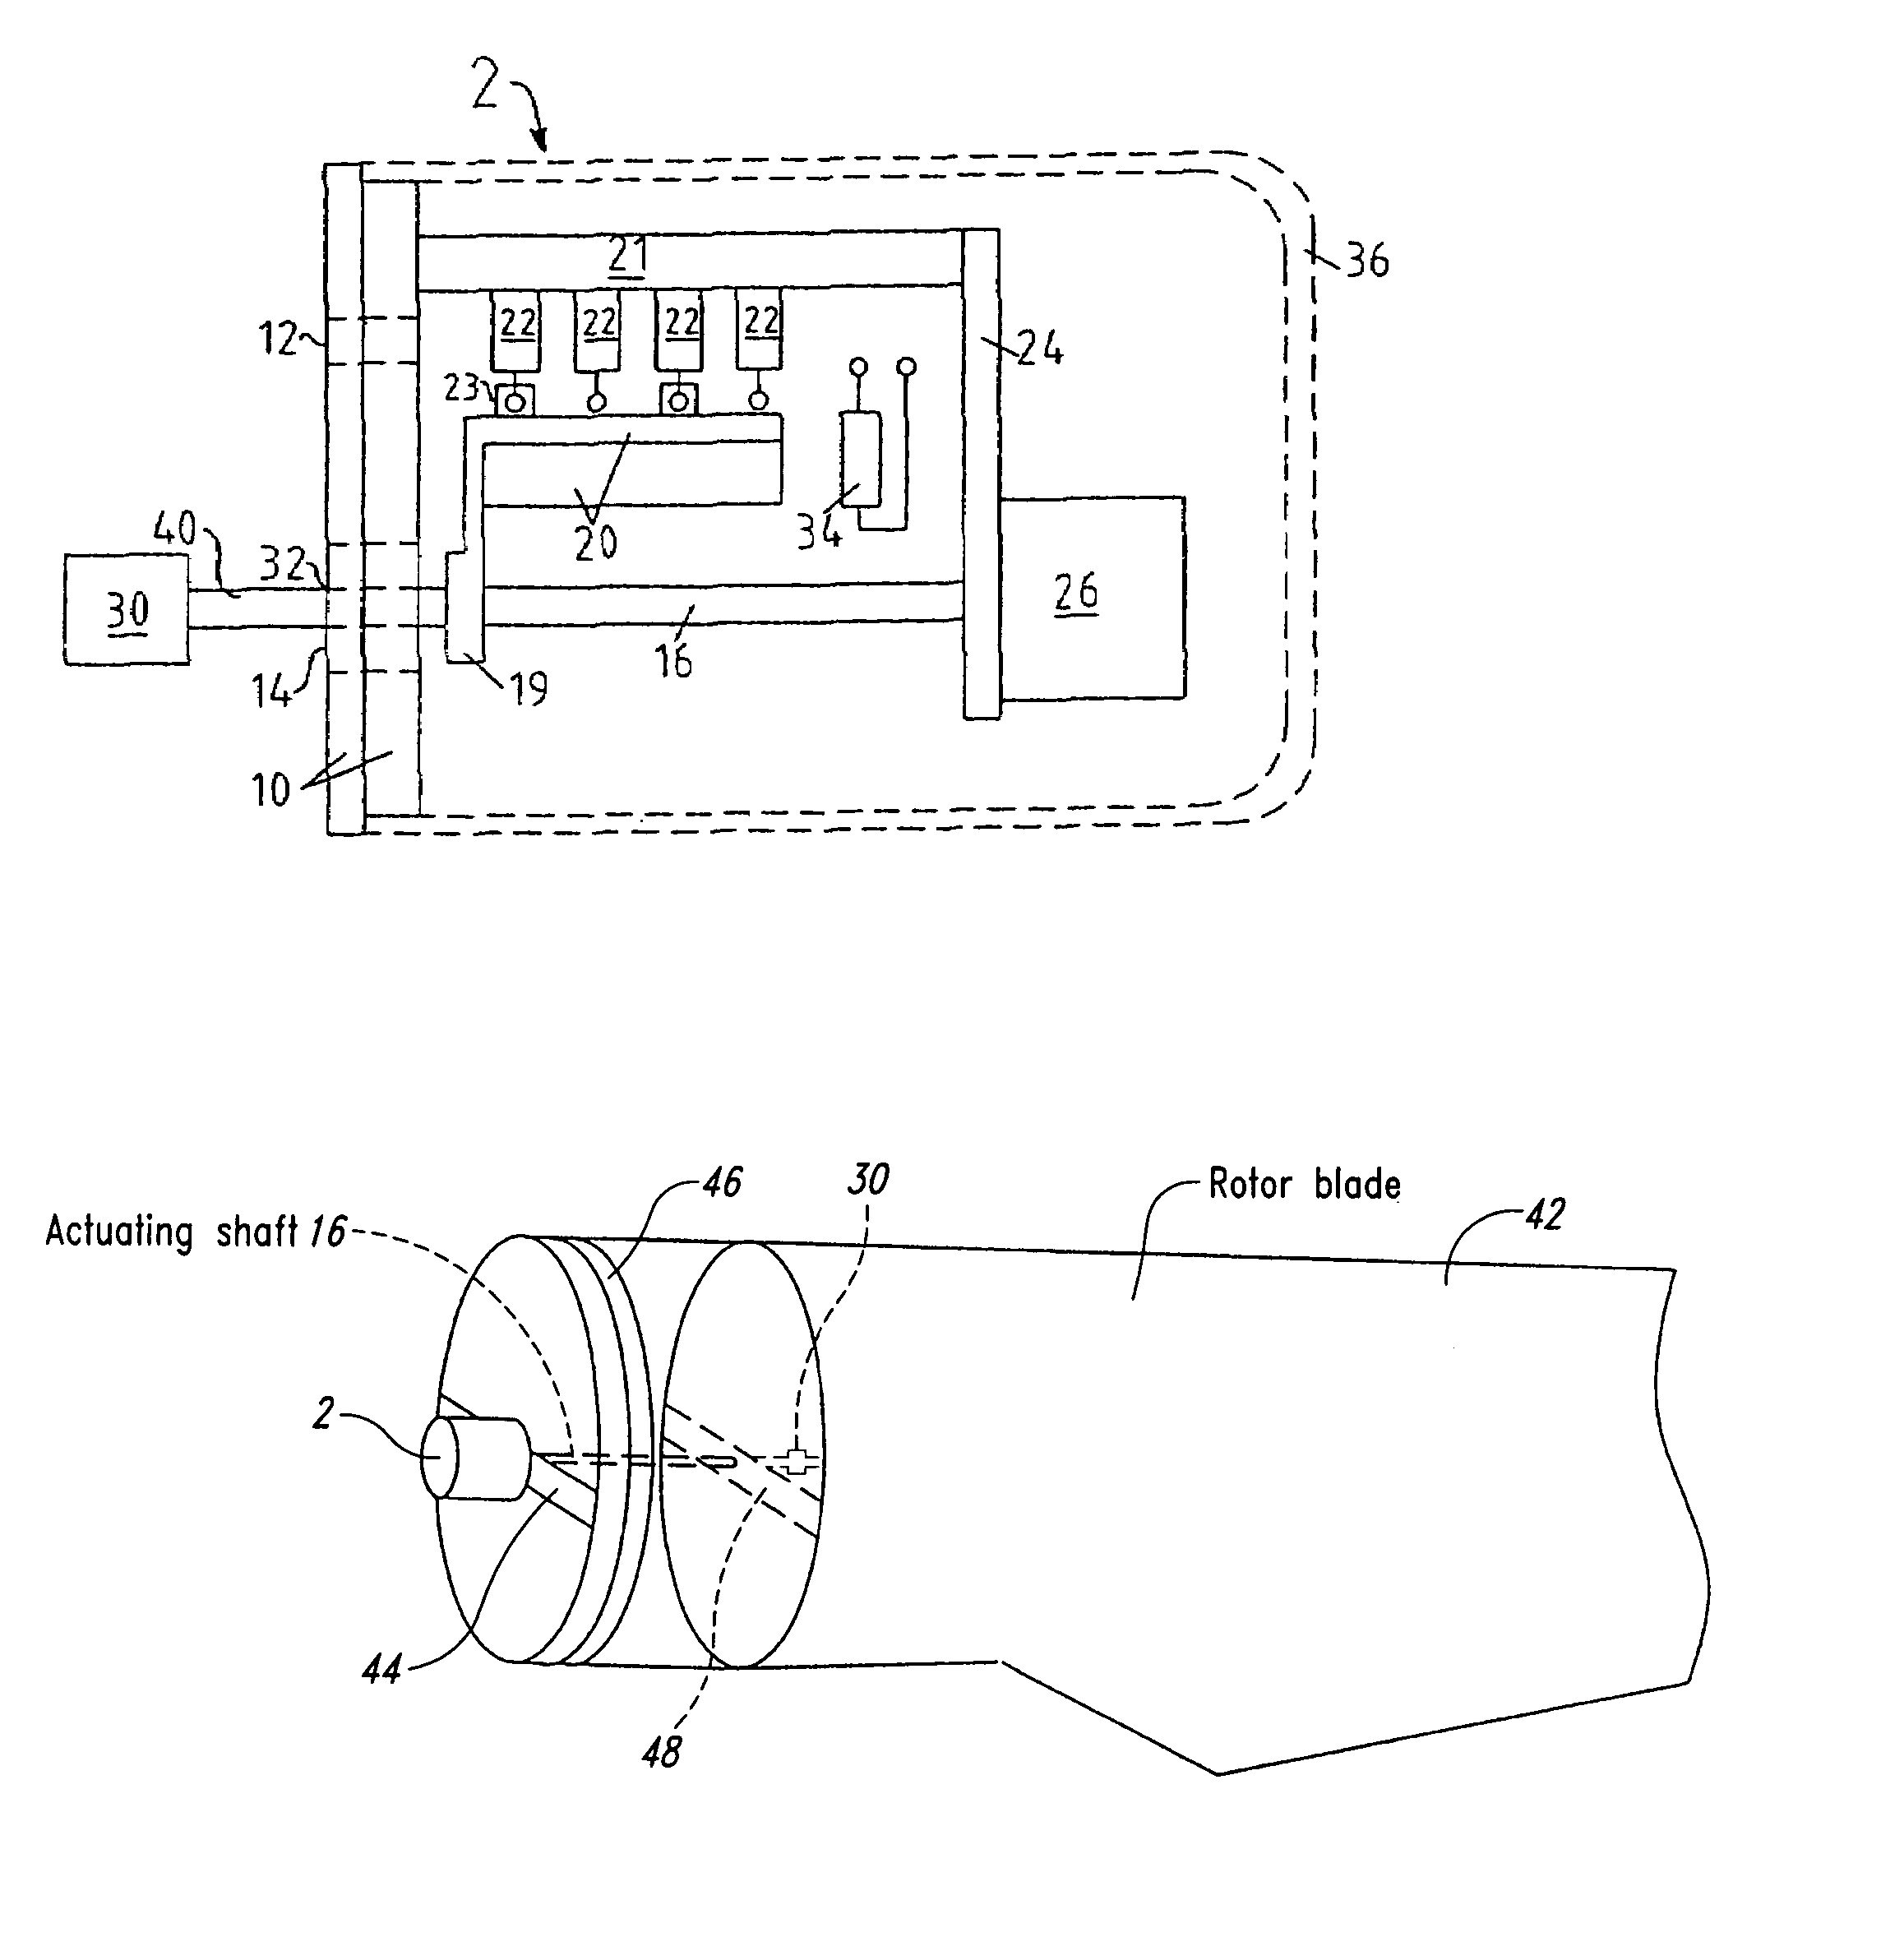 Switching apparatus with an actuating shaft